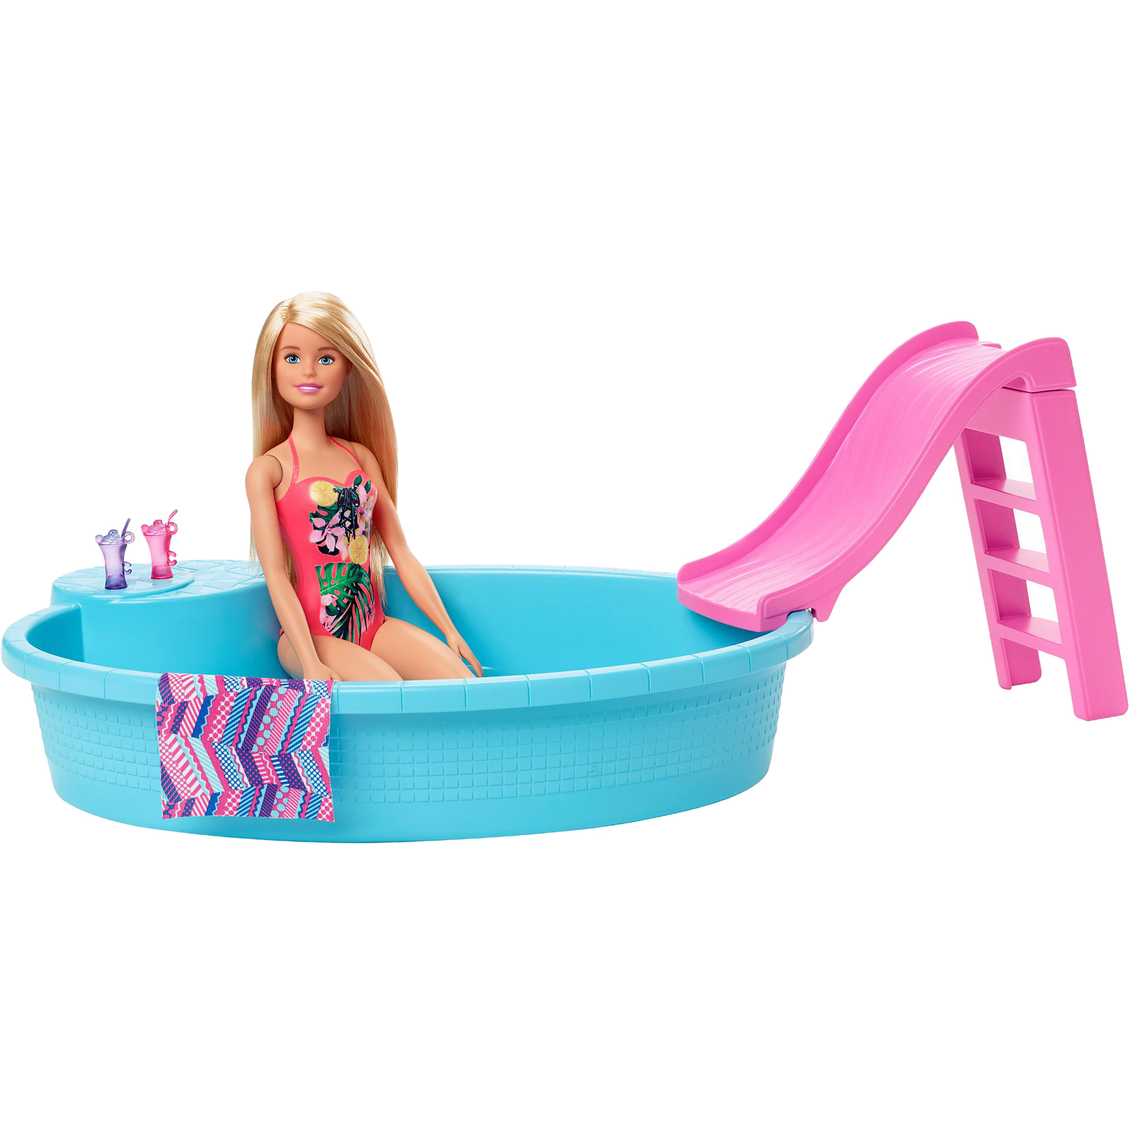 Barbie Pool with Doll Playset - Image 3 of 6